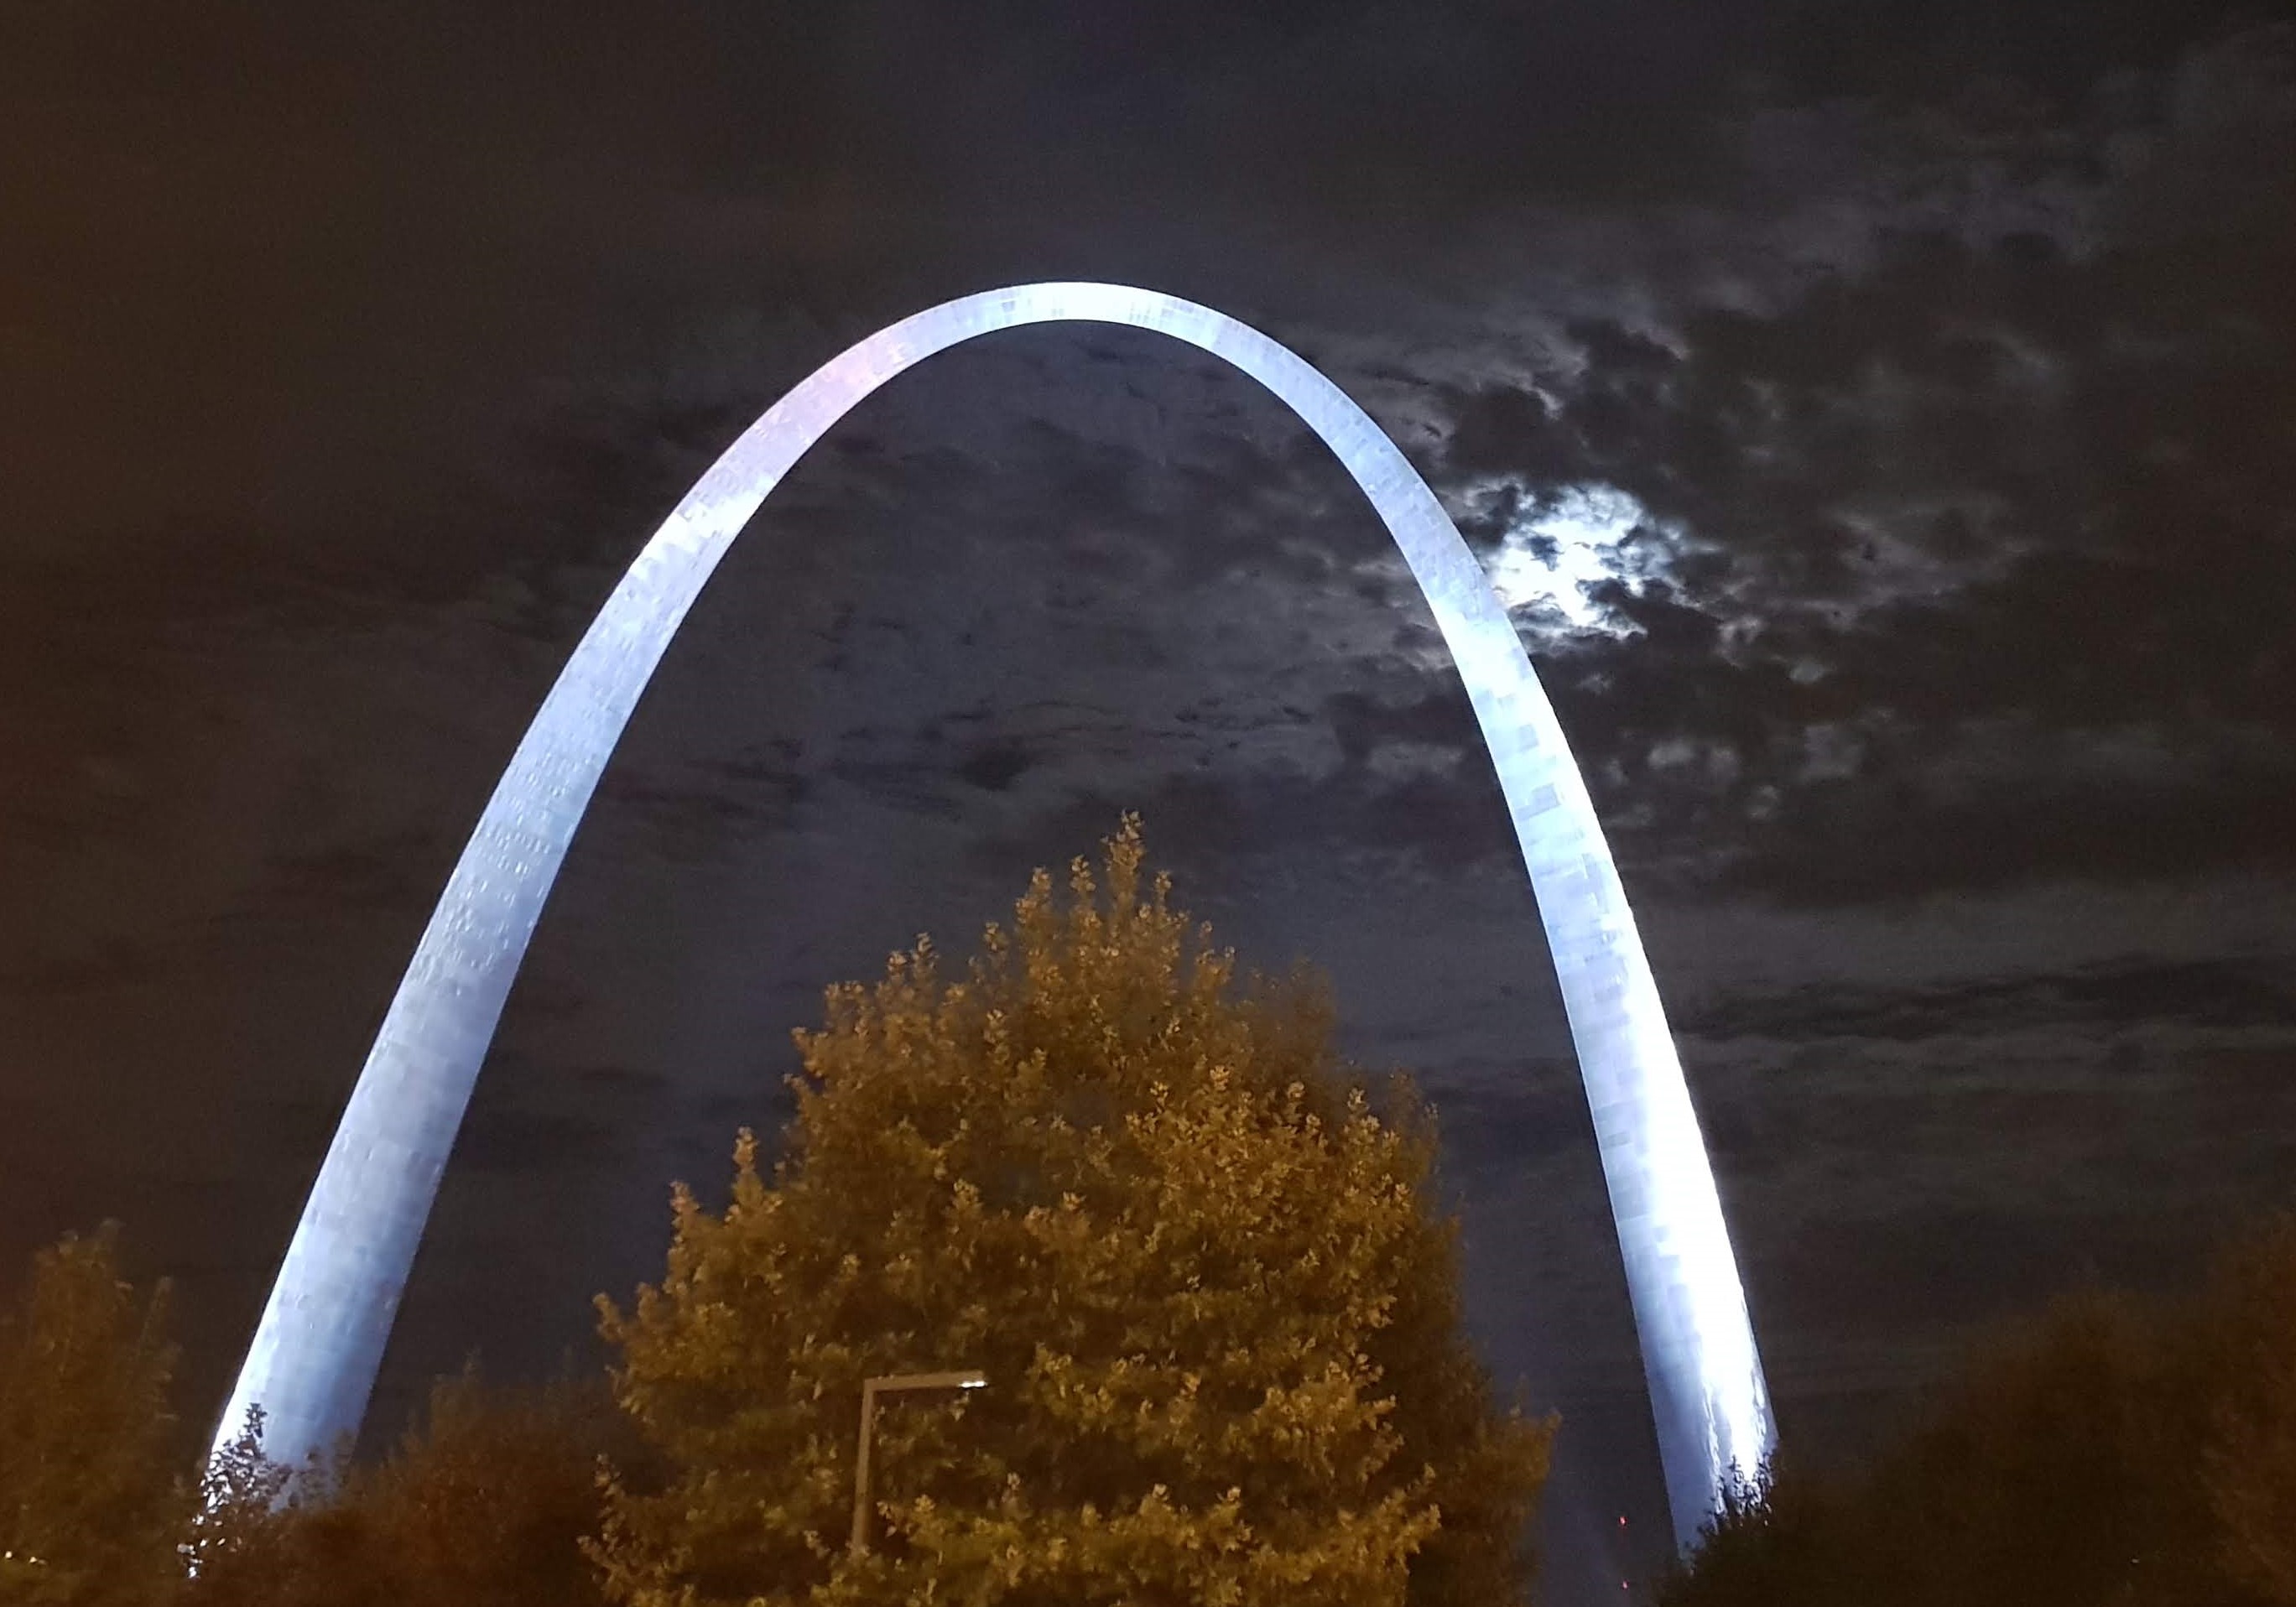 The Arch at night